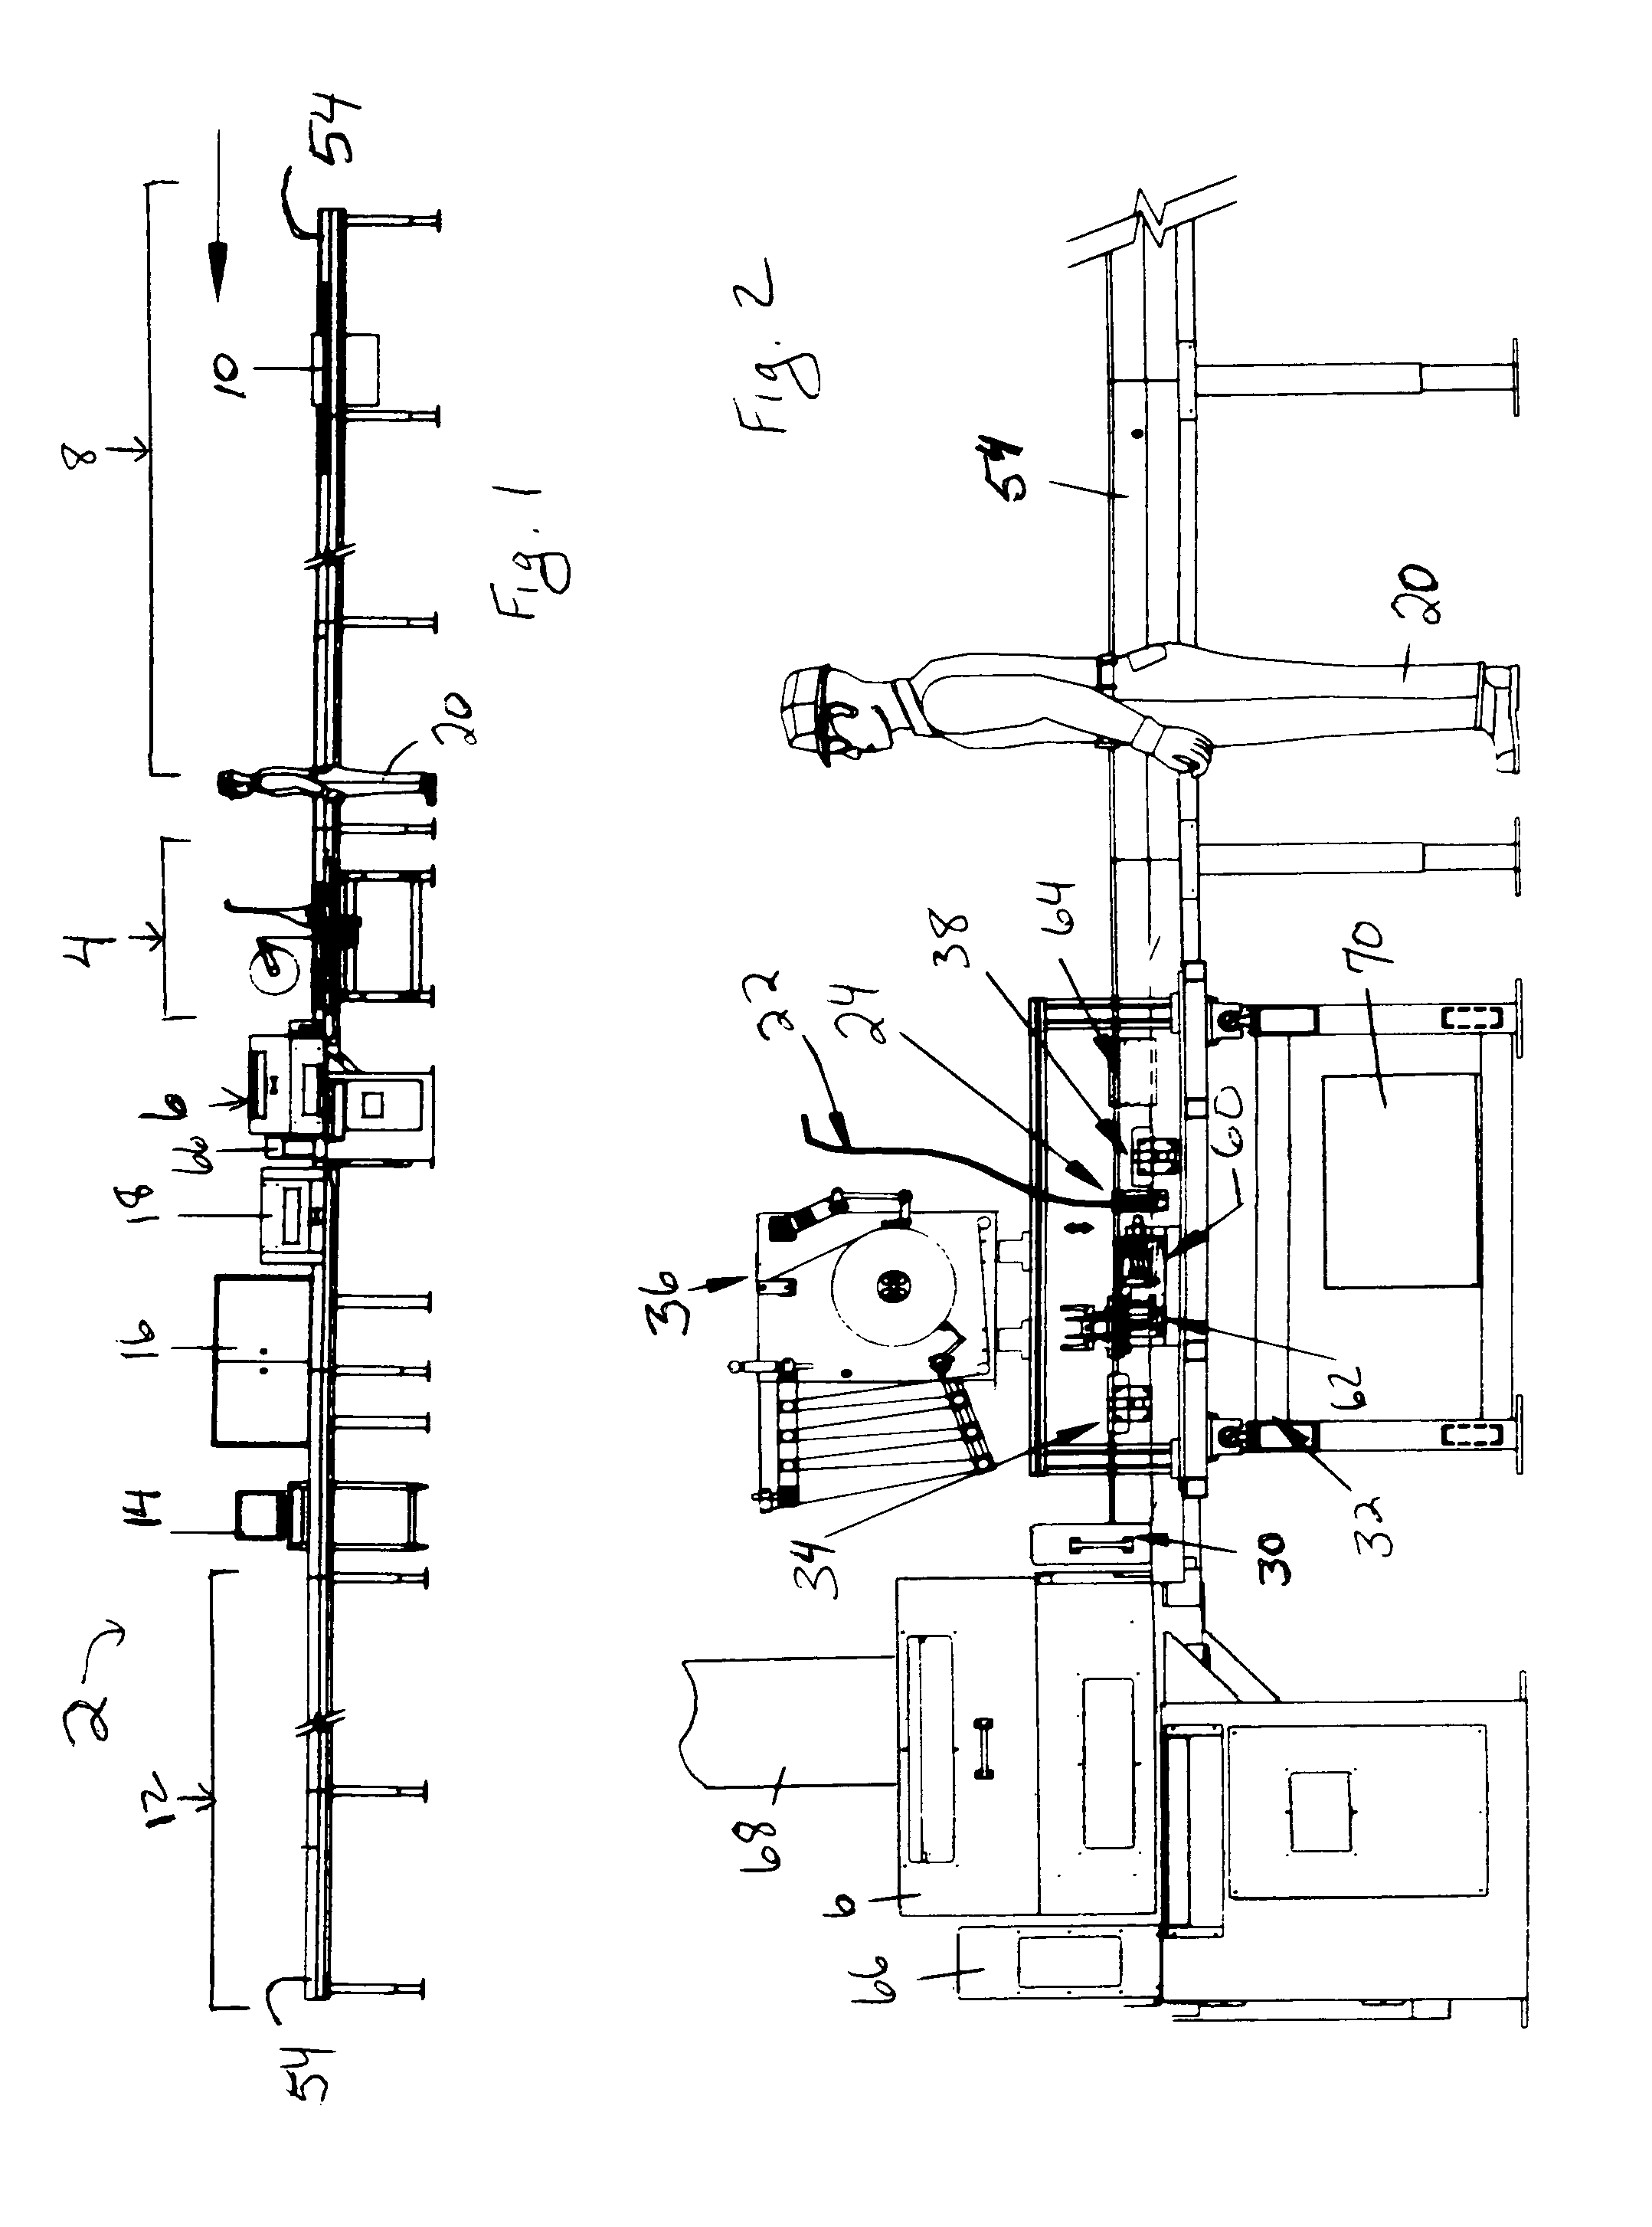 Method and improvement to saw system used for cutting I-joists to size